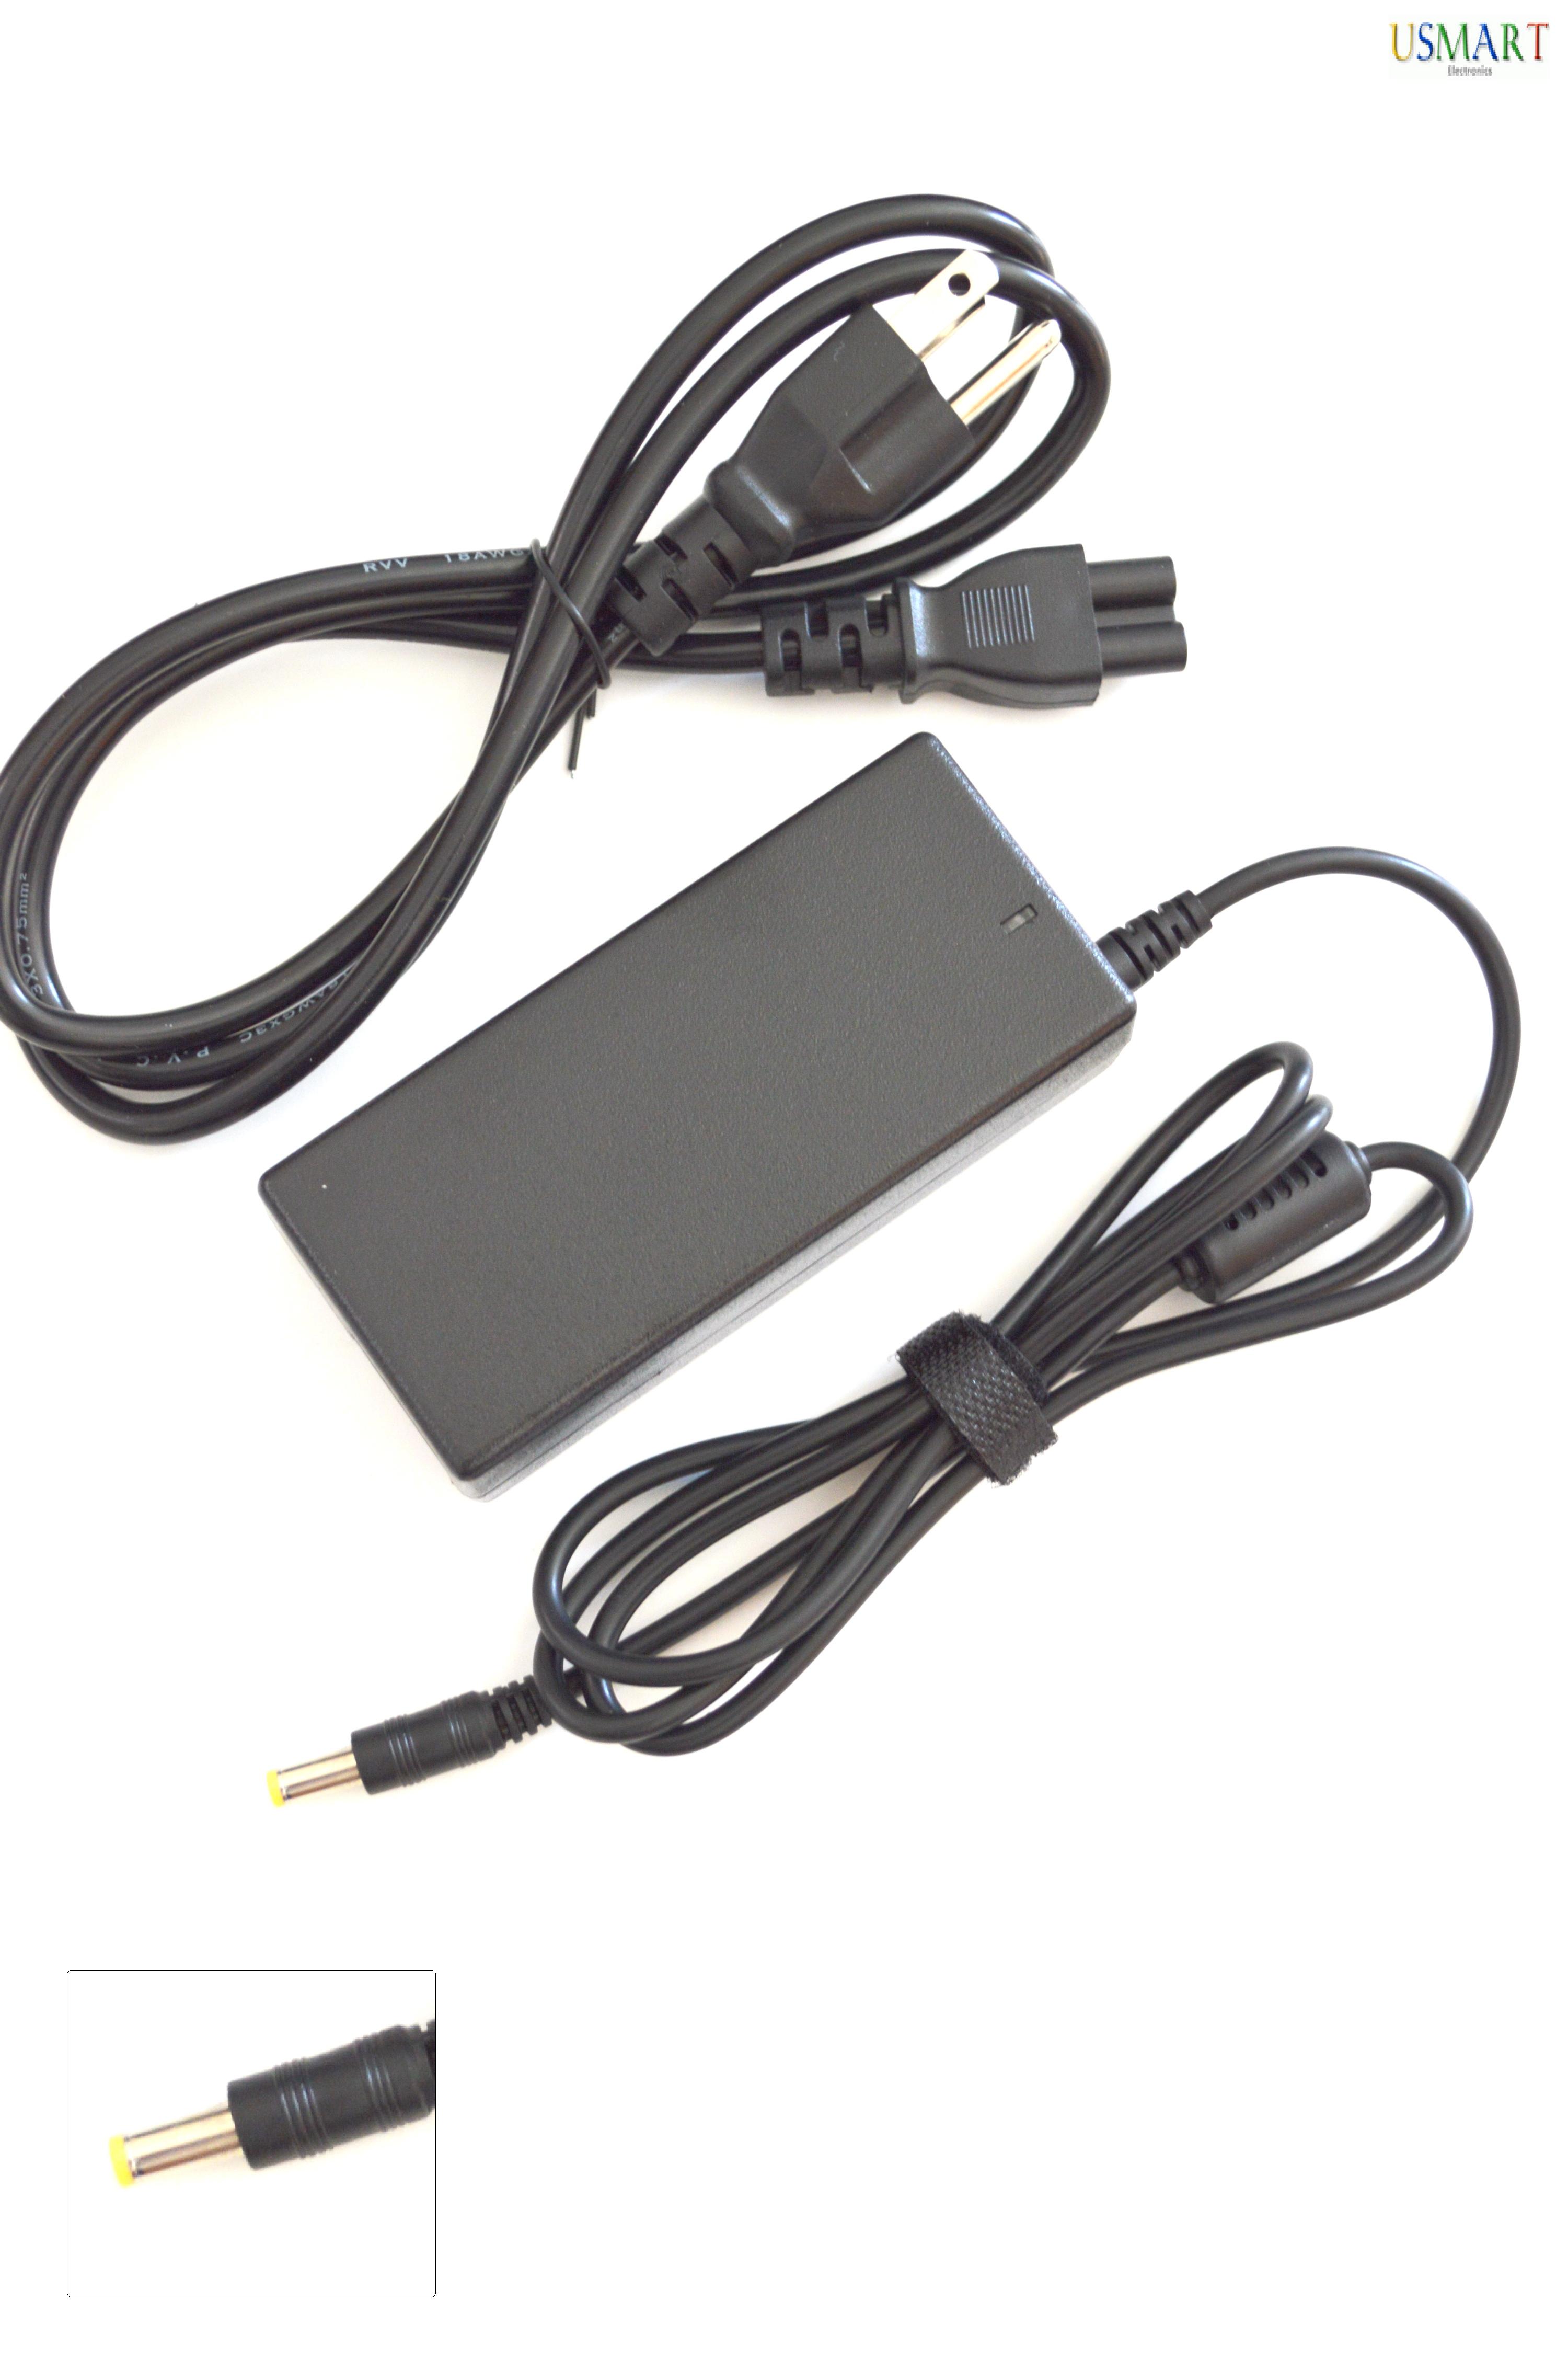 AC Power Adapter Charger For ACER ASPIRE 1683WLM 1684 1685 1685WLi 1690; ACER ASPIRE 1685WLCi 1690-II 1690WLC 1691; ACER ASPIRE 1690WLCi 1691WL 2000 2000LCi Laptop Notebook PC Power Supply Cord - image 1 of 4